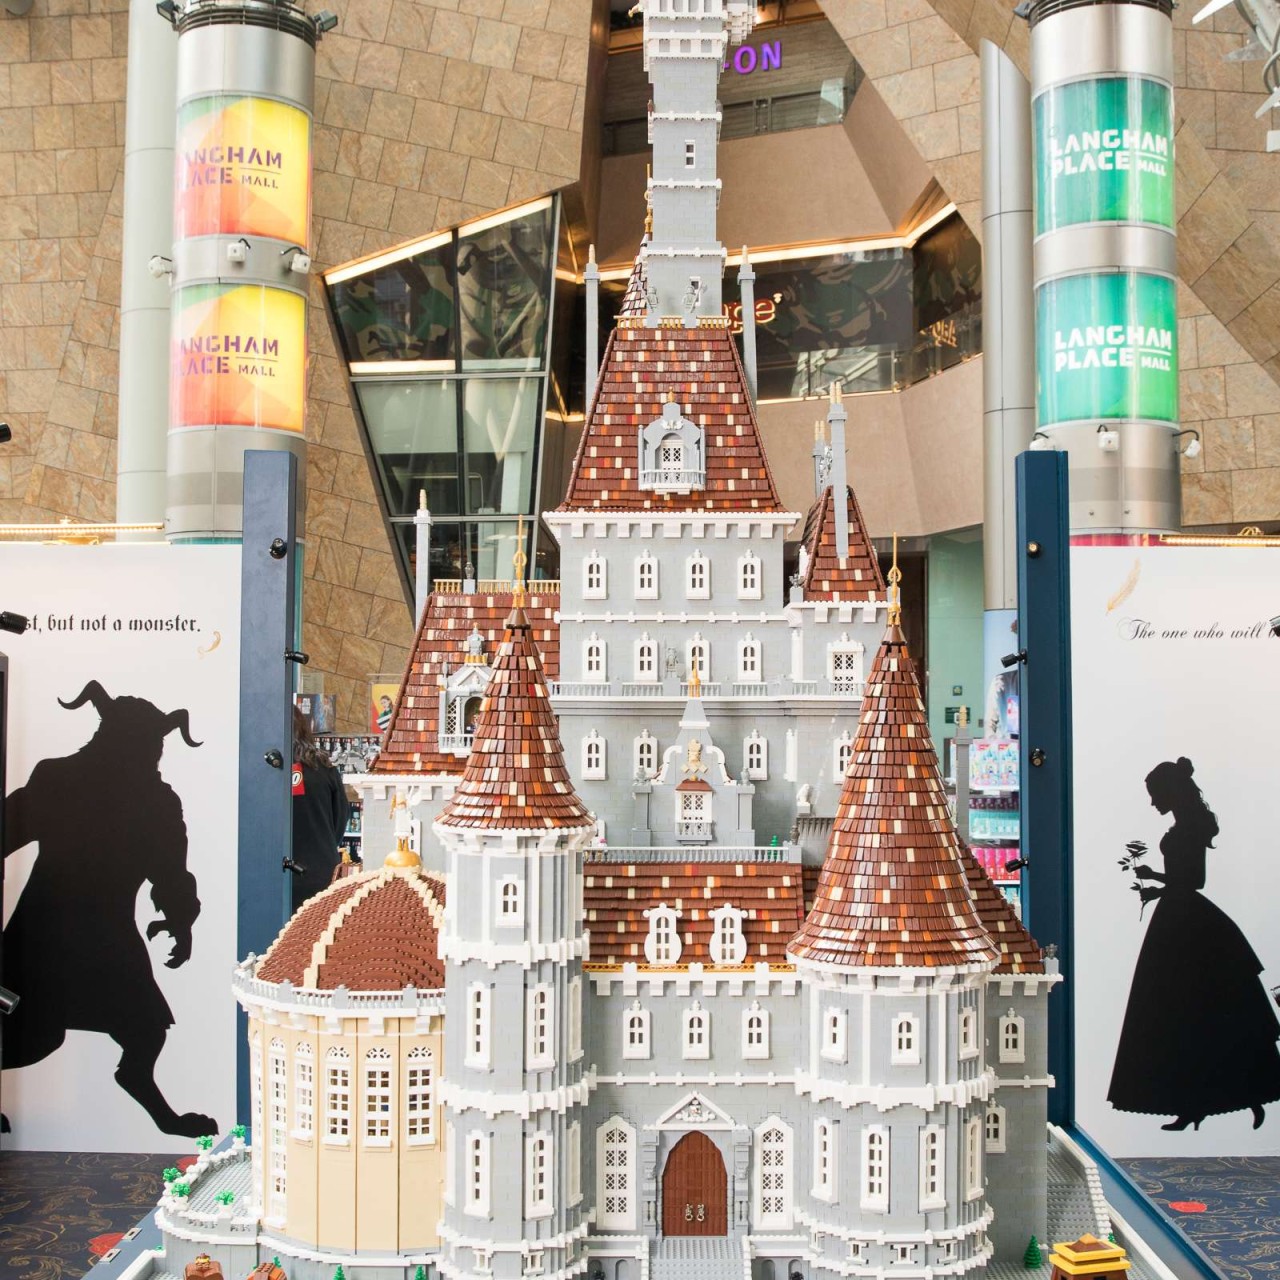 Disney S Beauty And The Beast Castle Brought To Life In Hong Kong Thanks To Lego And Professional Lego Artist Kevin Hall Yp South China Morning Post